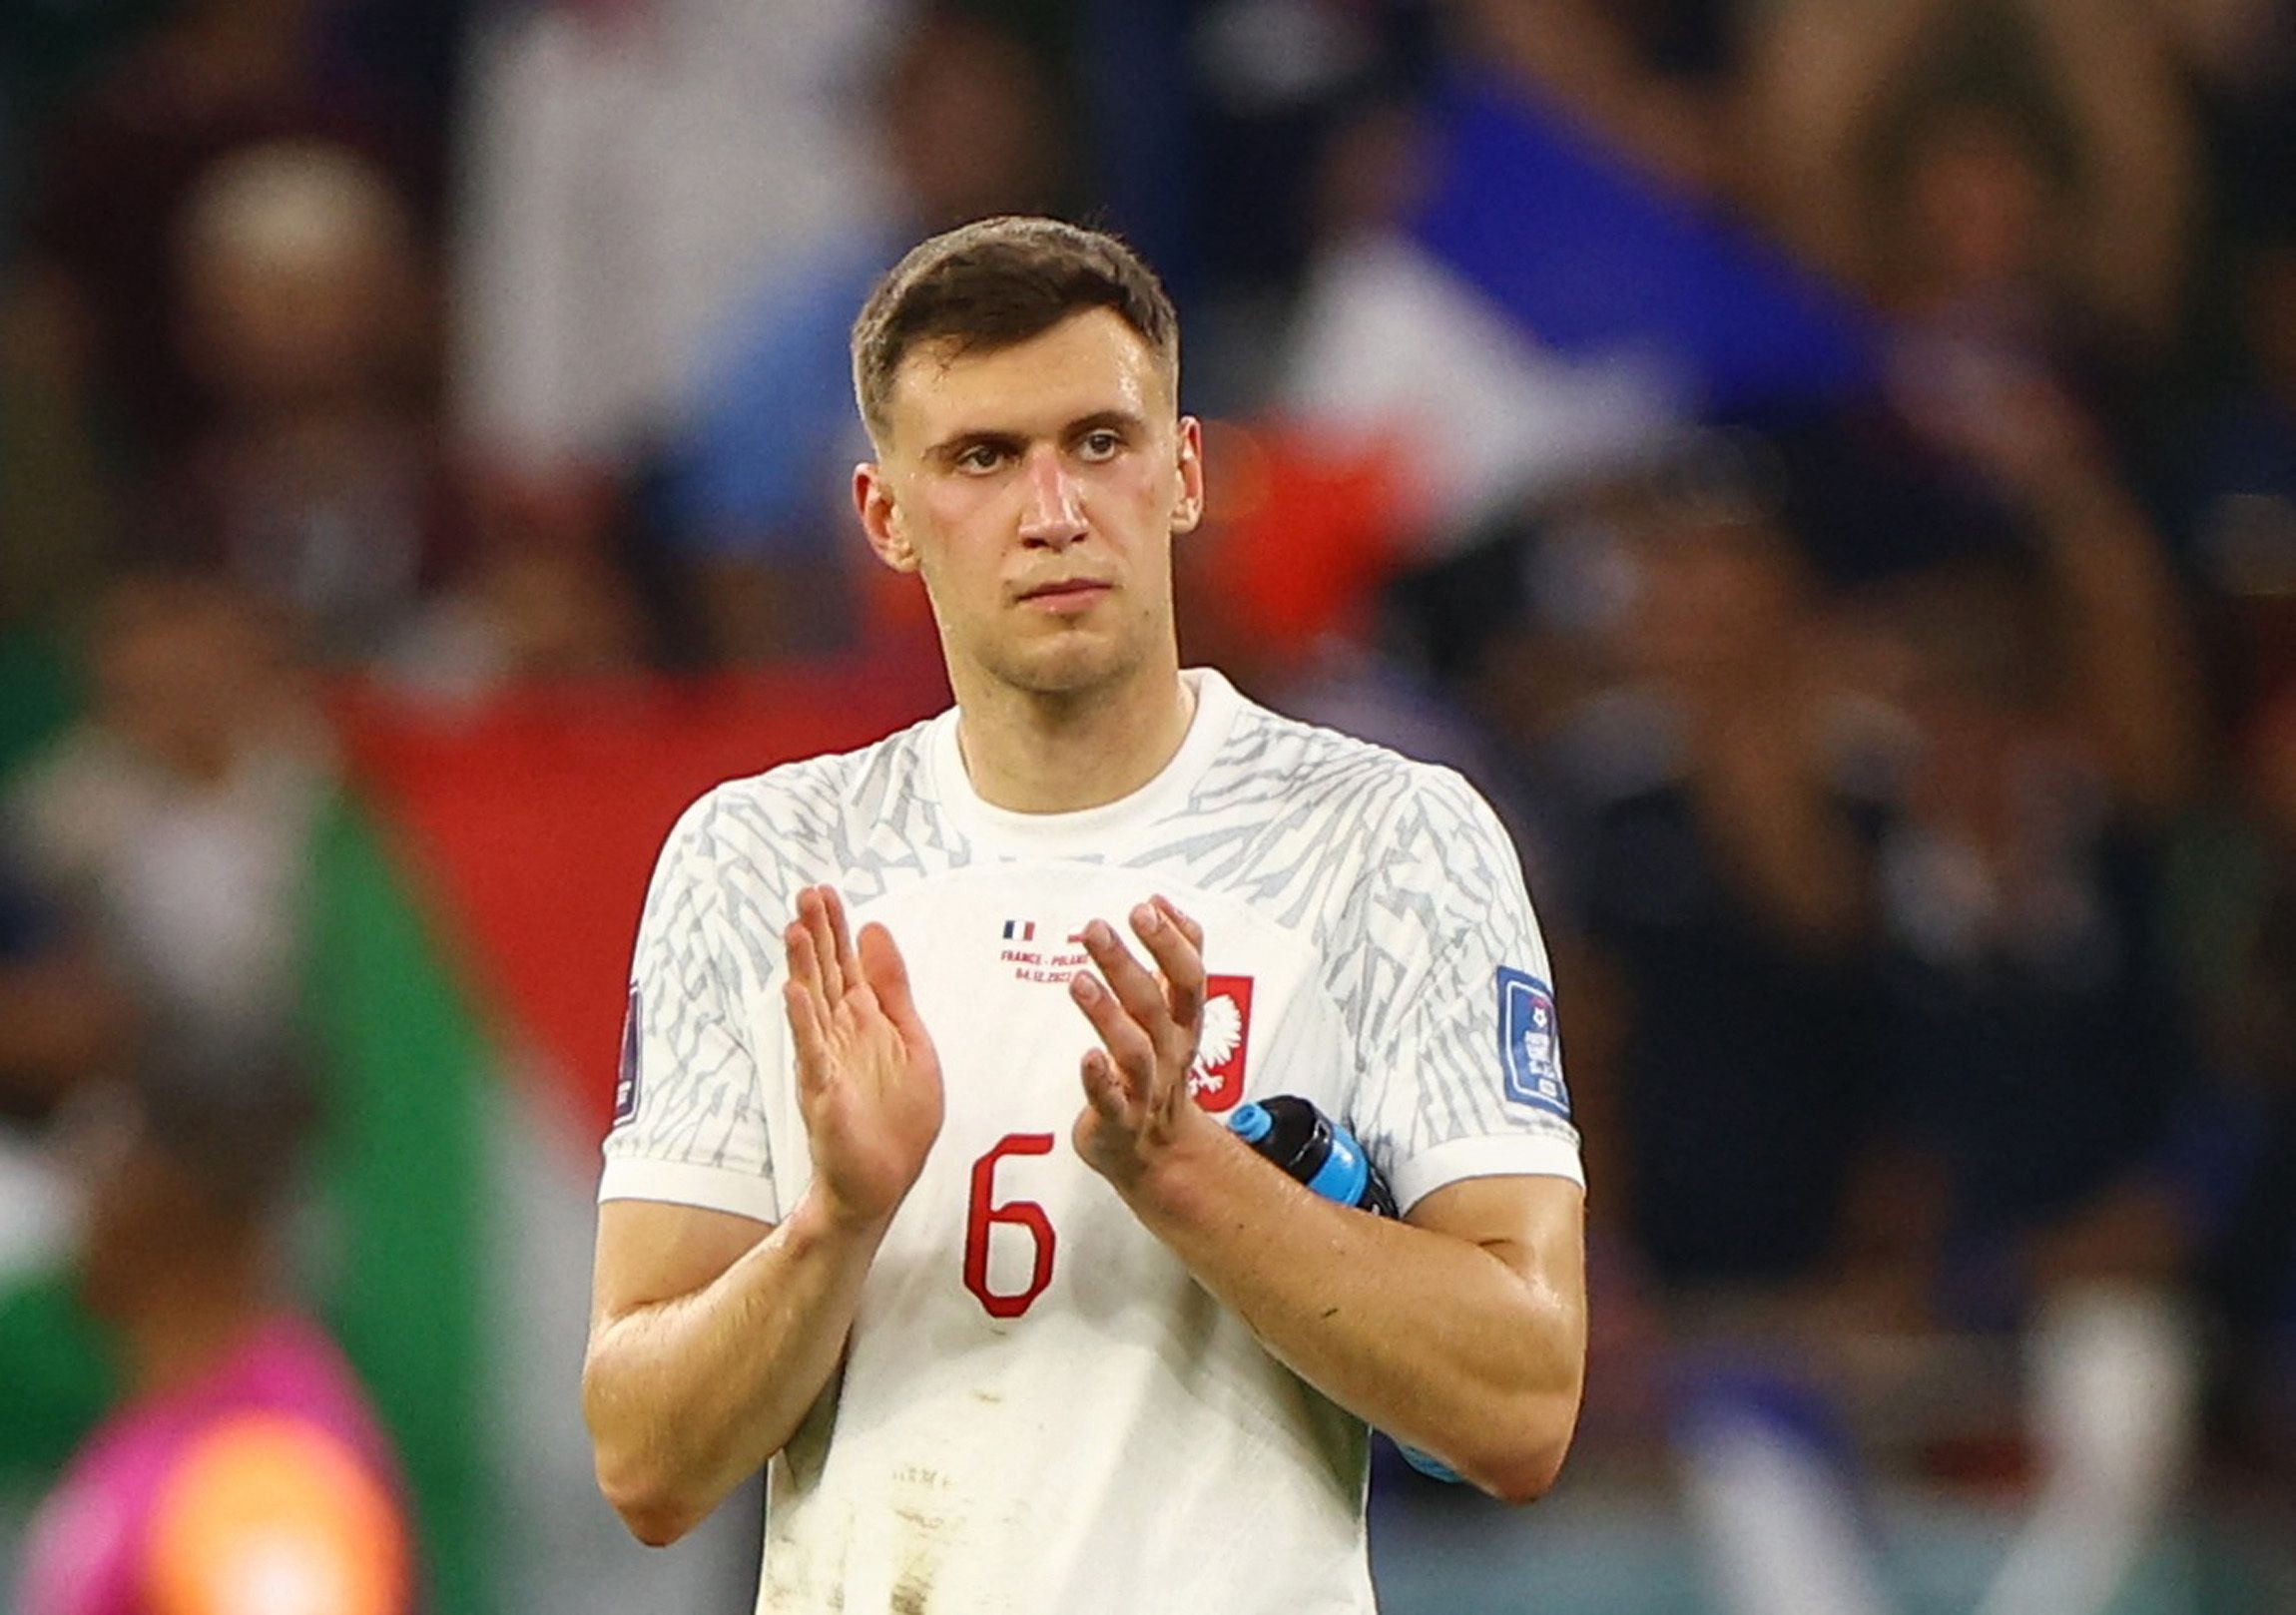 Soccer Football - FIFA World Cup Qatar 2022 - Round of 16 - France v Poland - Al Thumama Stadium, Doha, Qatar - December 4, 2022 Poland's Krystian Bielik applauds fans after the match as Poland are eliminated from the World Cup REUTERS/Hannah Mckay